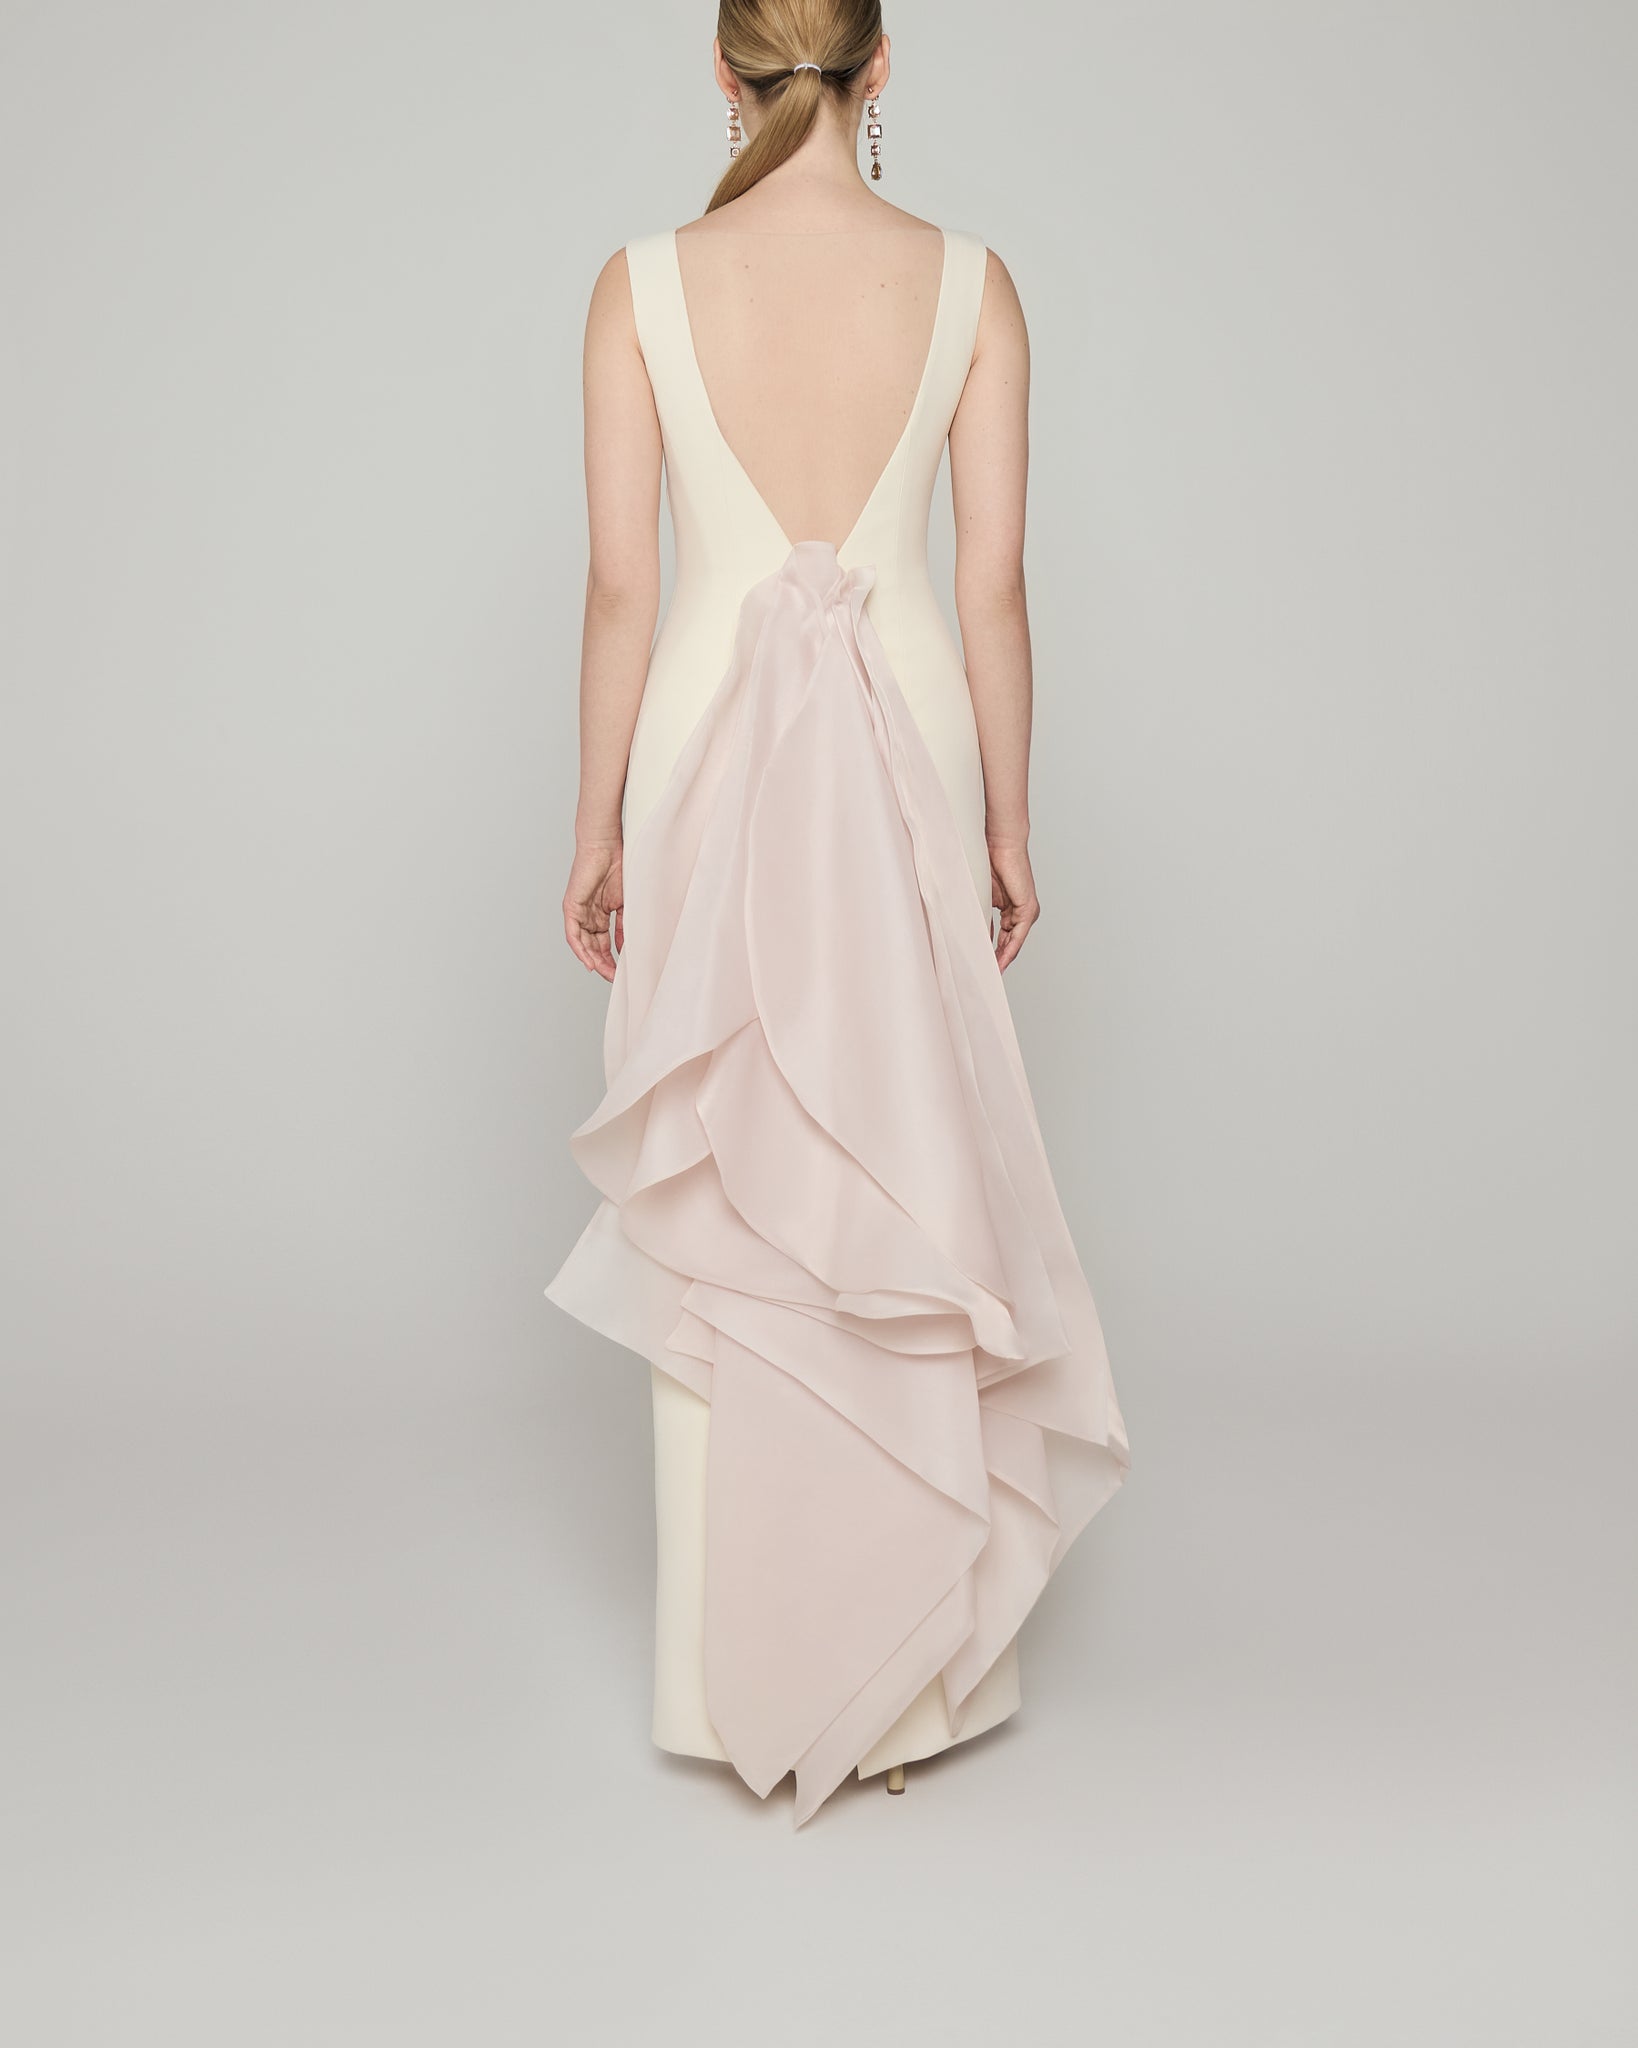 V-neck sleeveless dress with illusion back and organza train